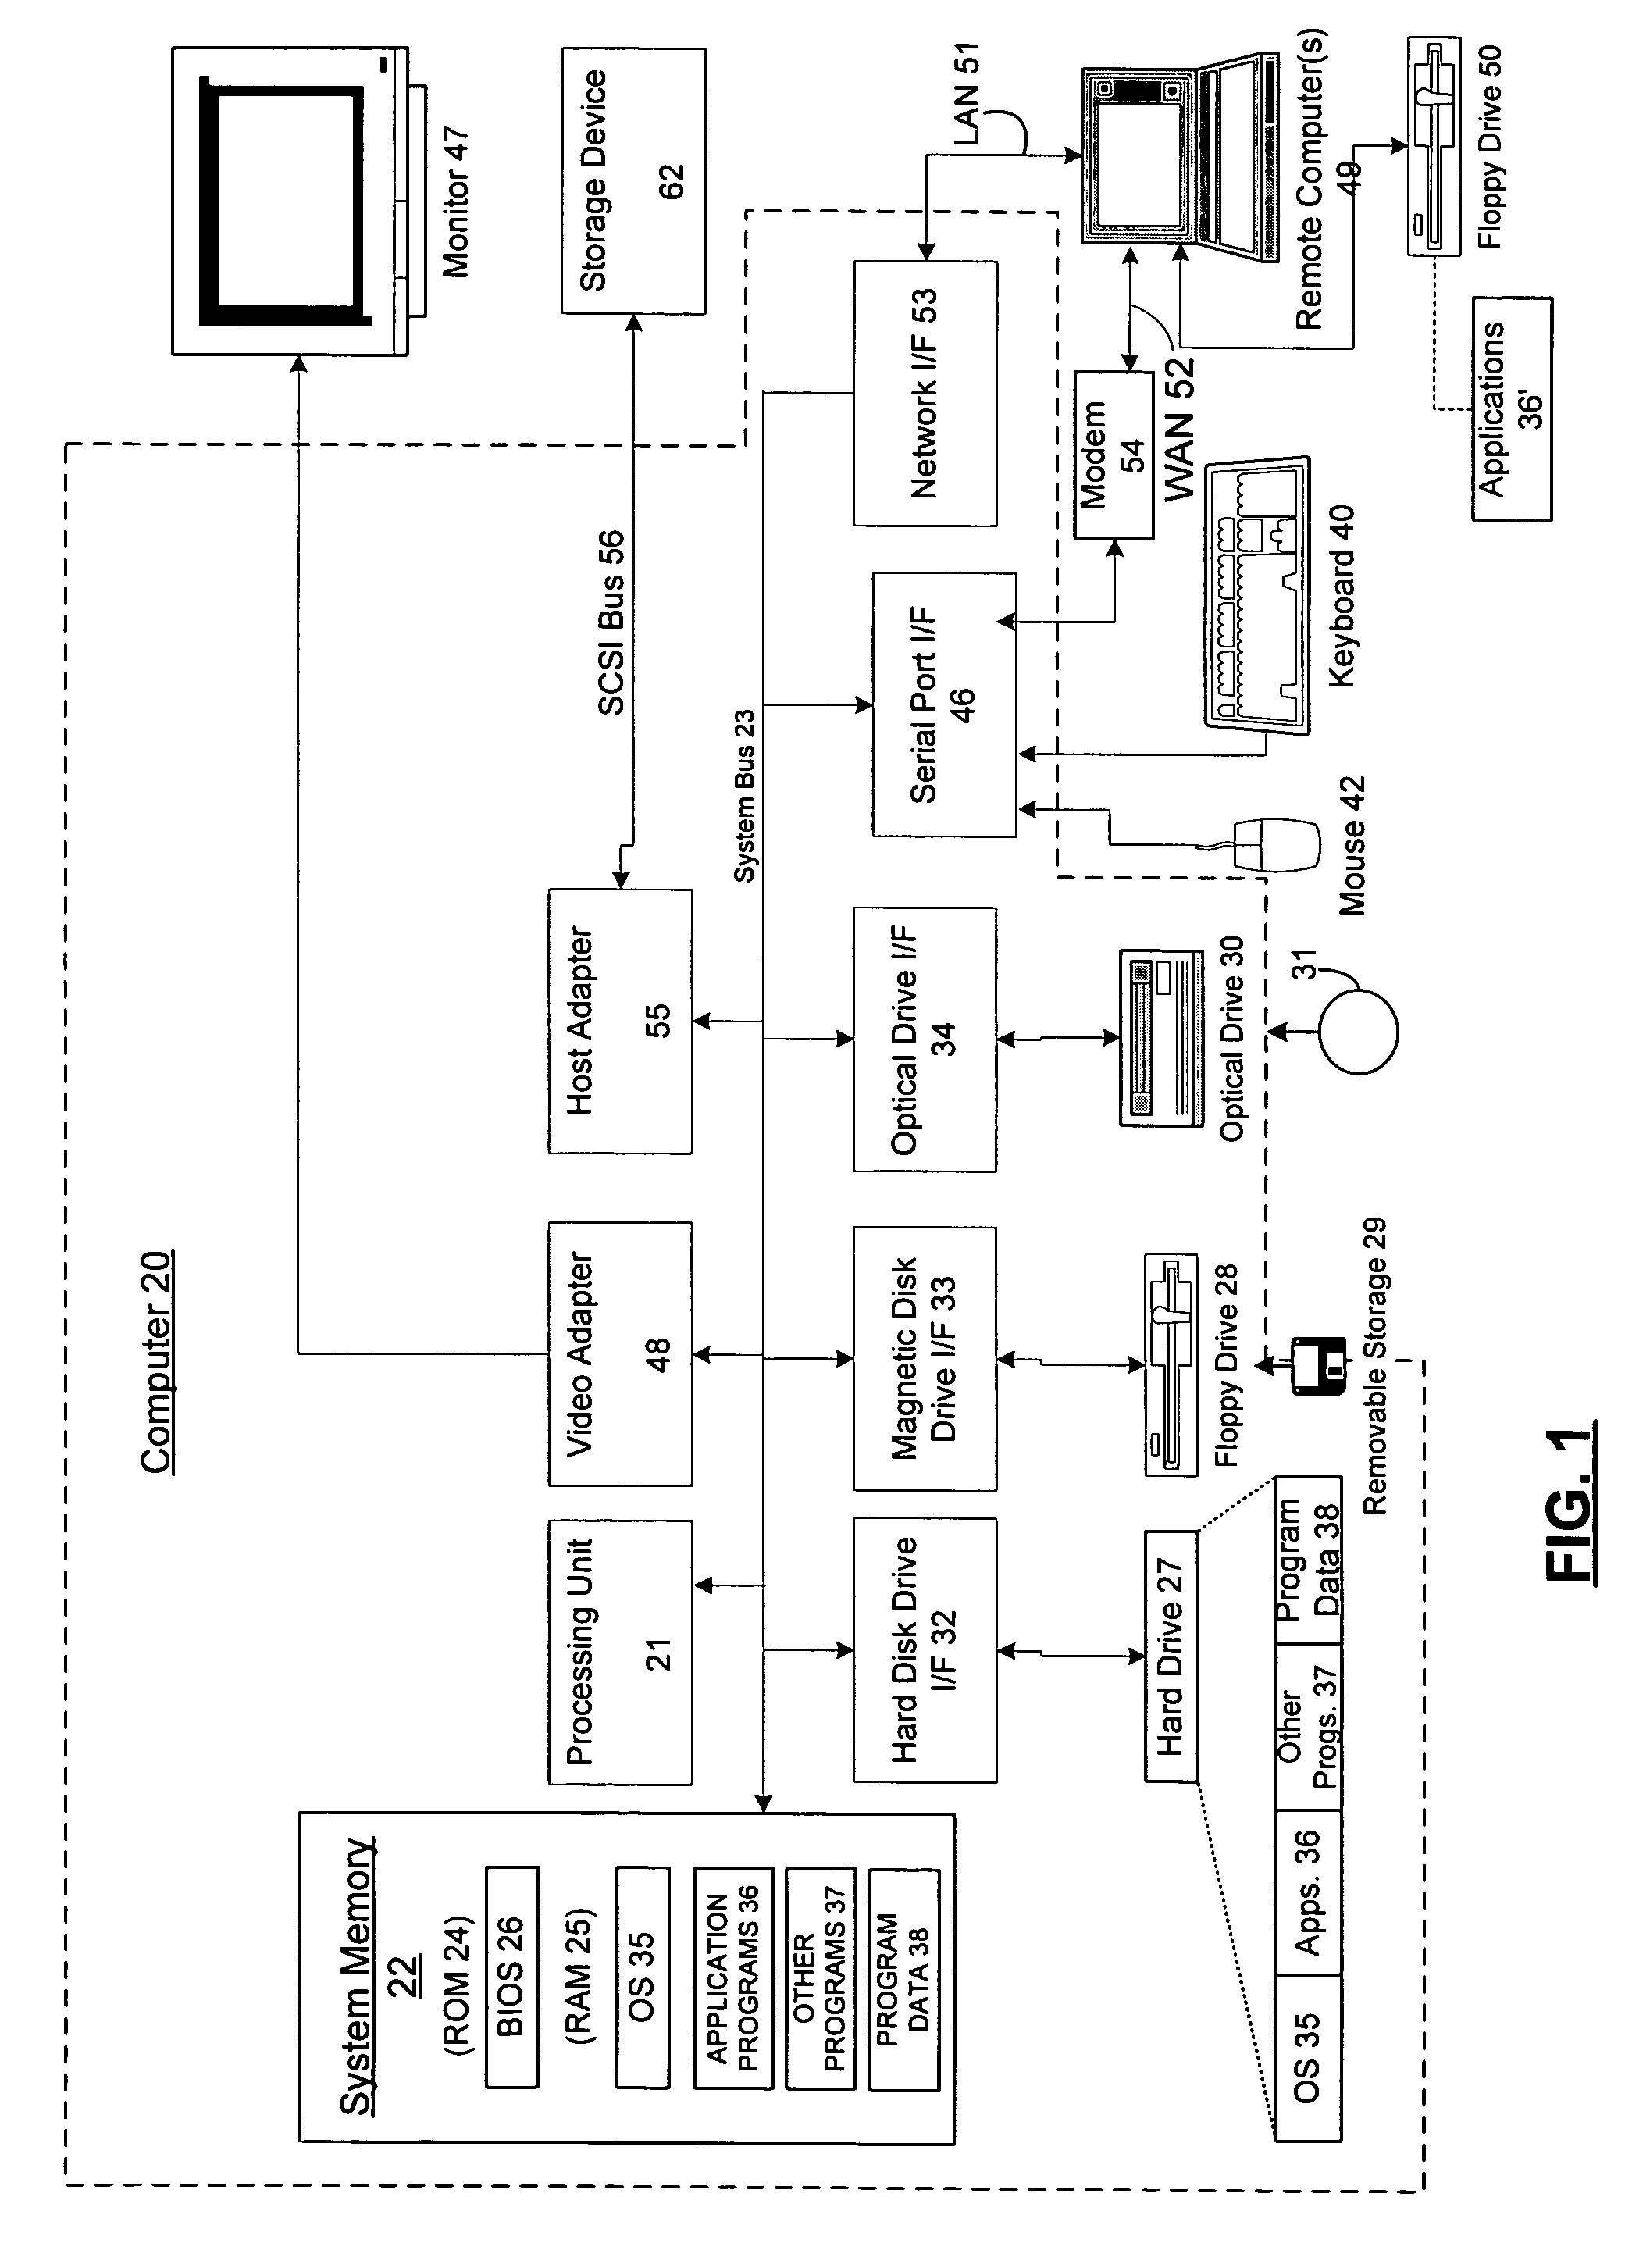 Systems and methods for interfacing with computer devices